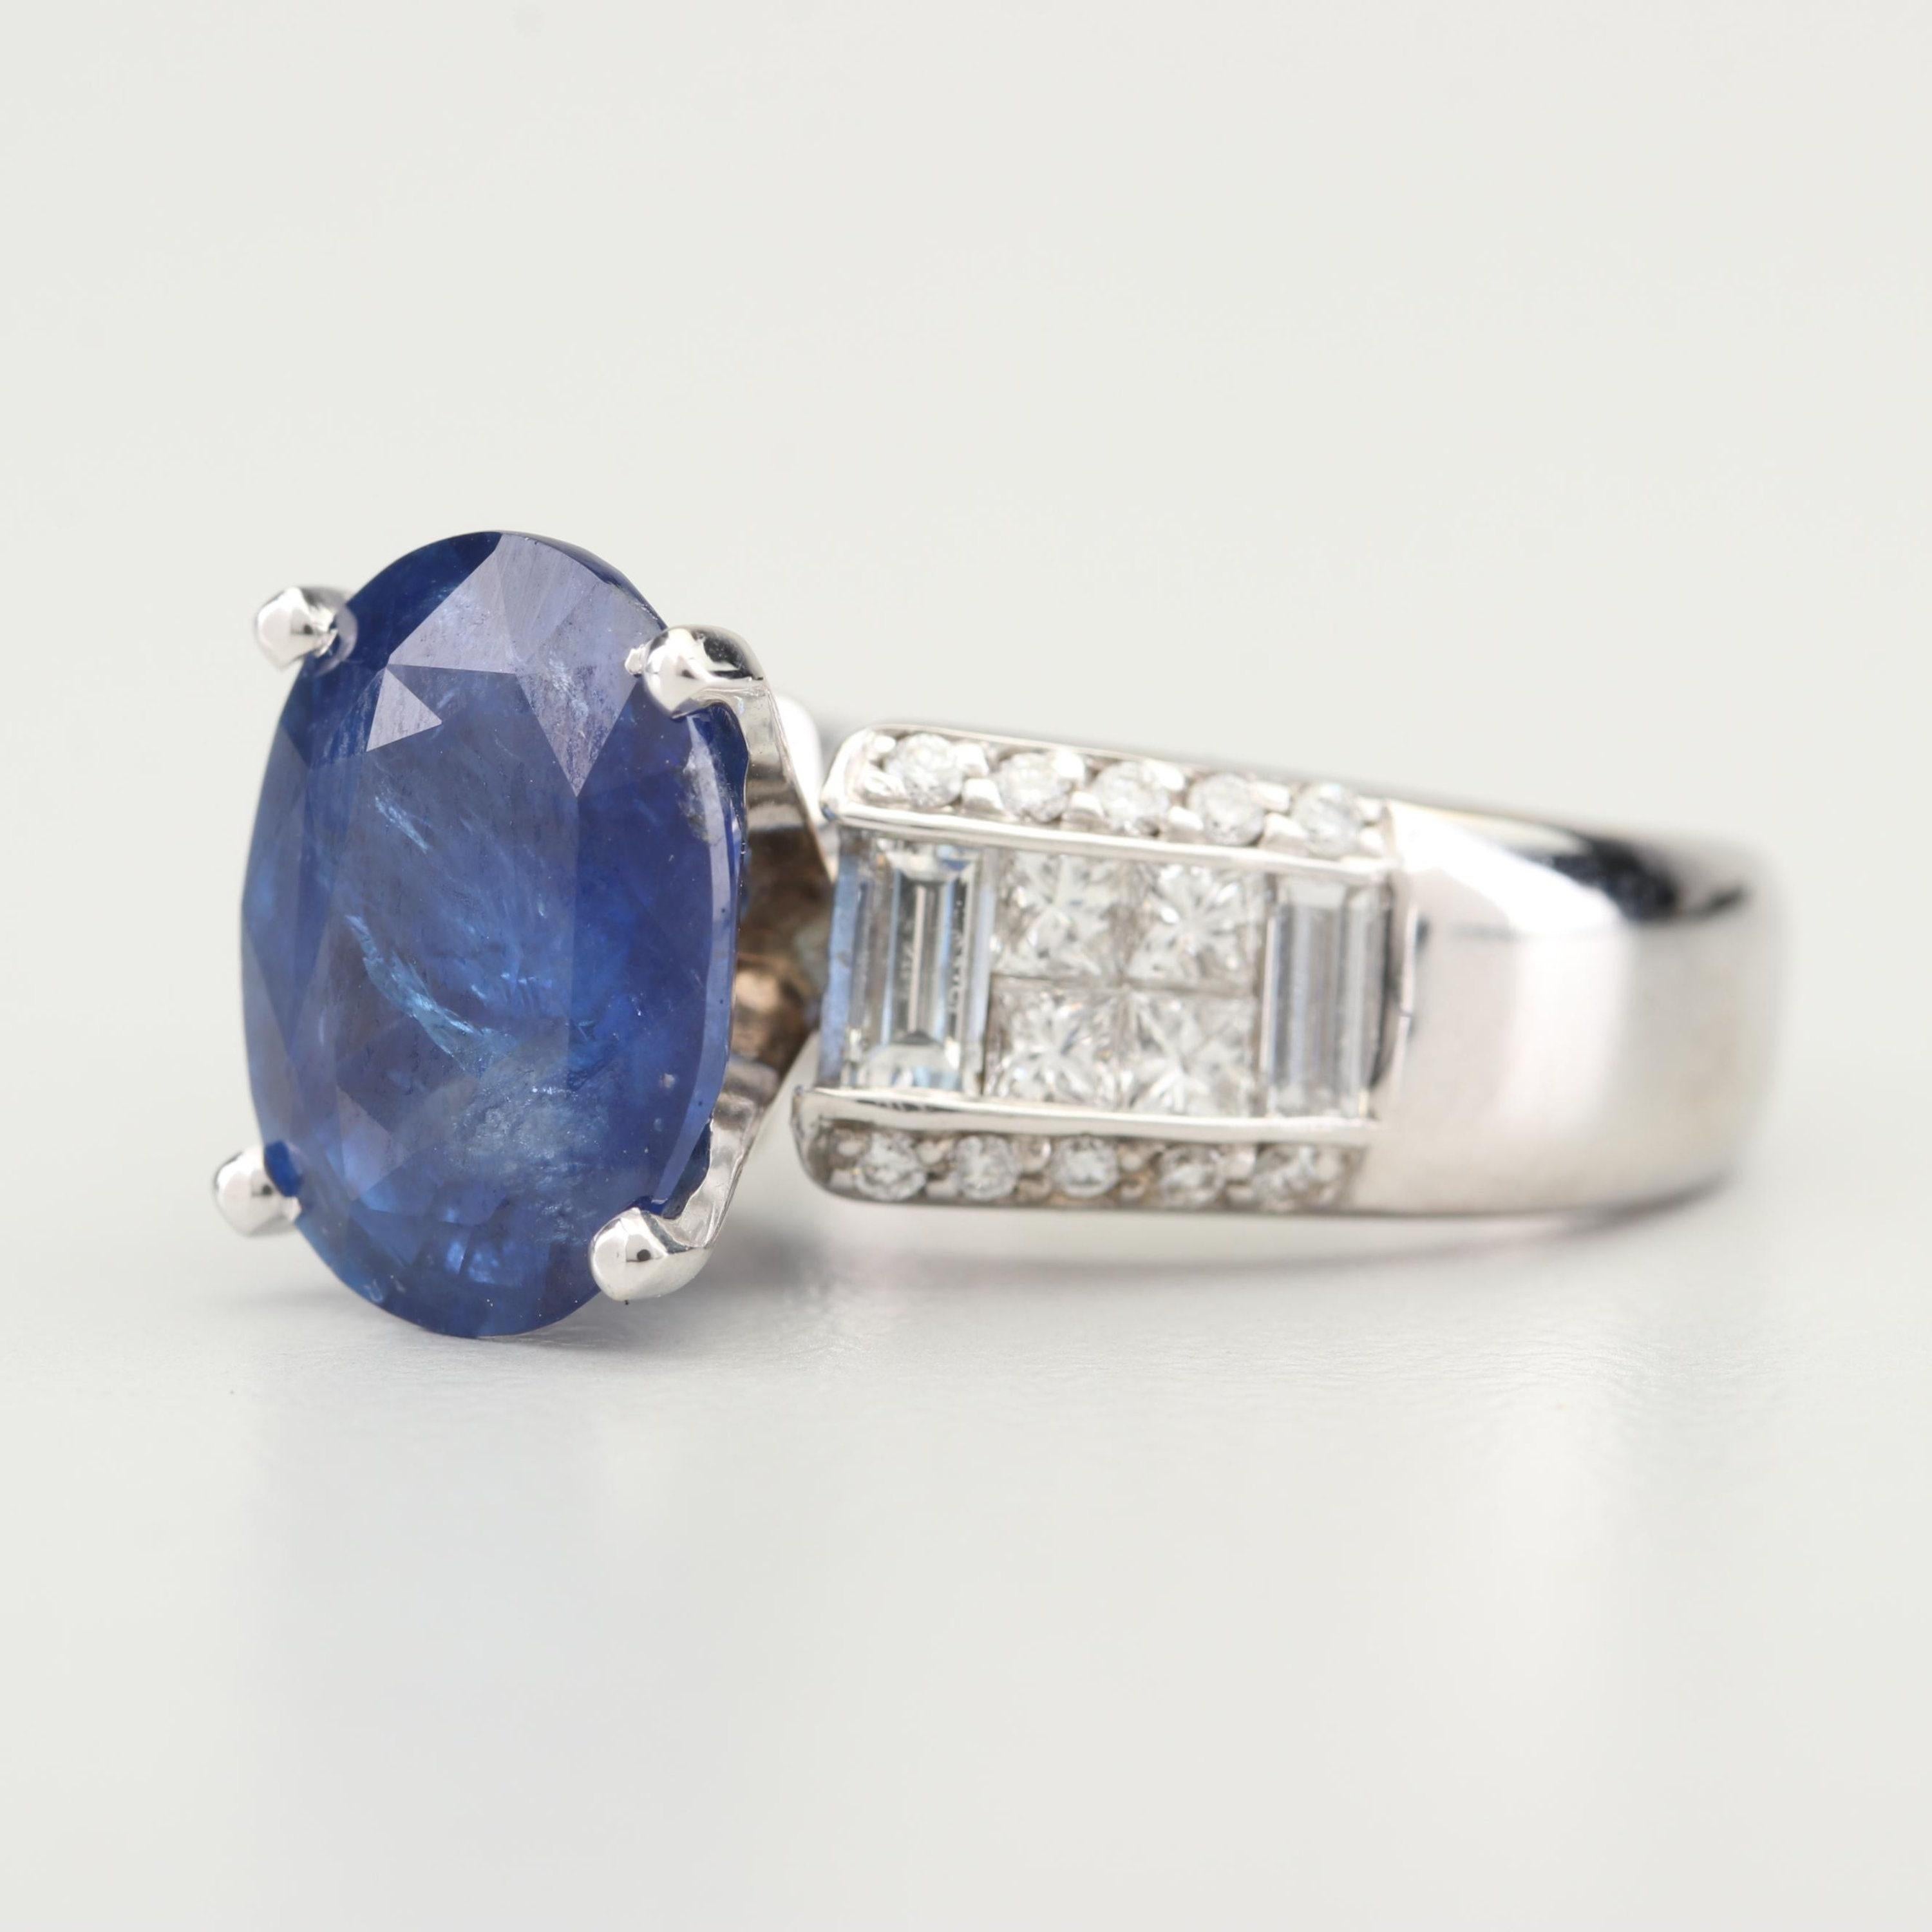 For Sale:  Certified 4.95 CT Blue Ceylon Sapphire and 1.21 CT Diamond Engagement Band Ring 5